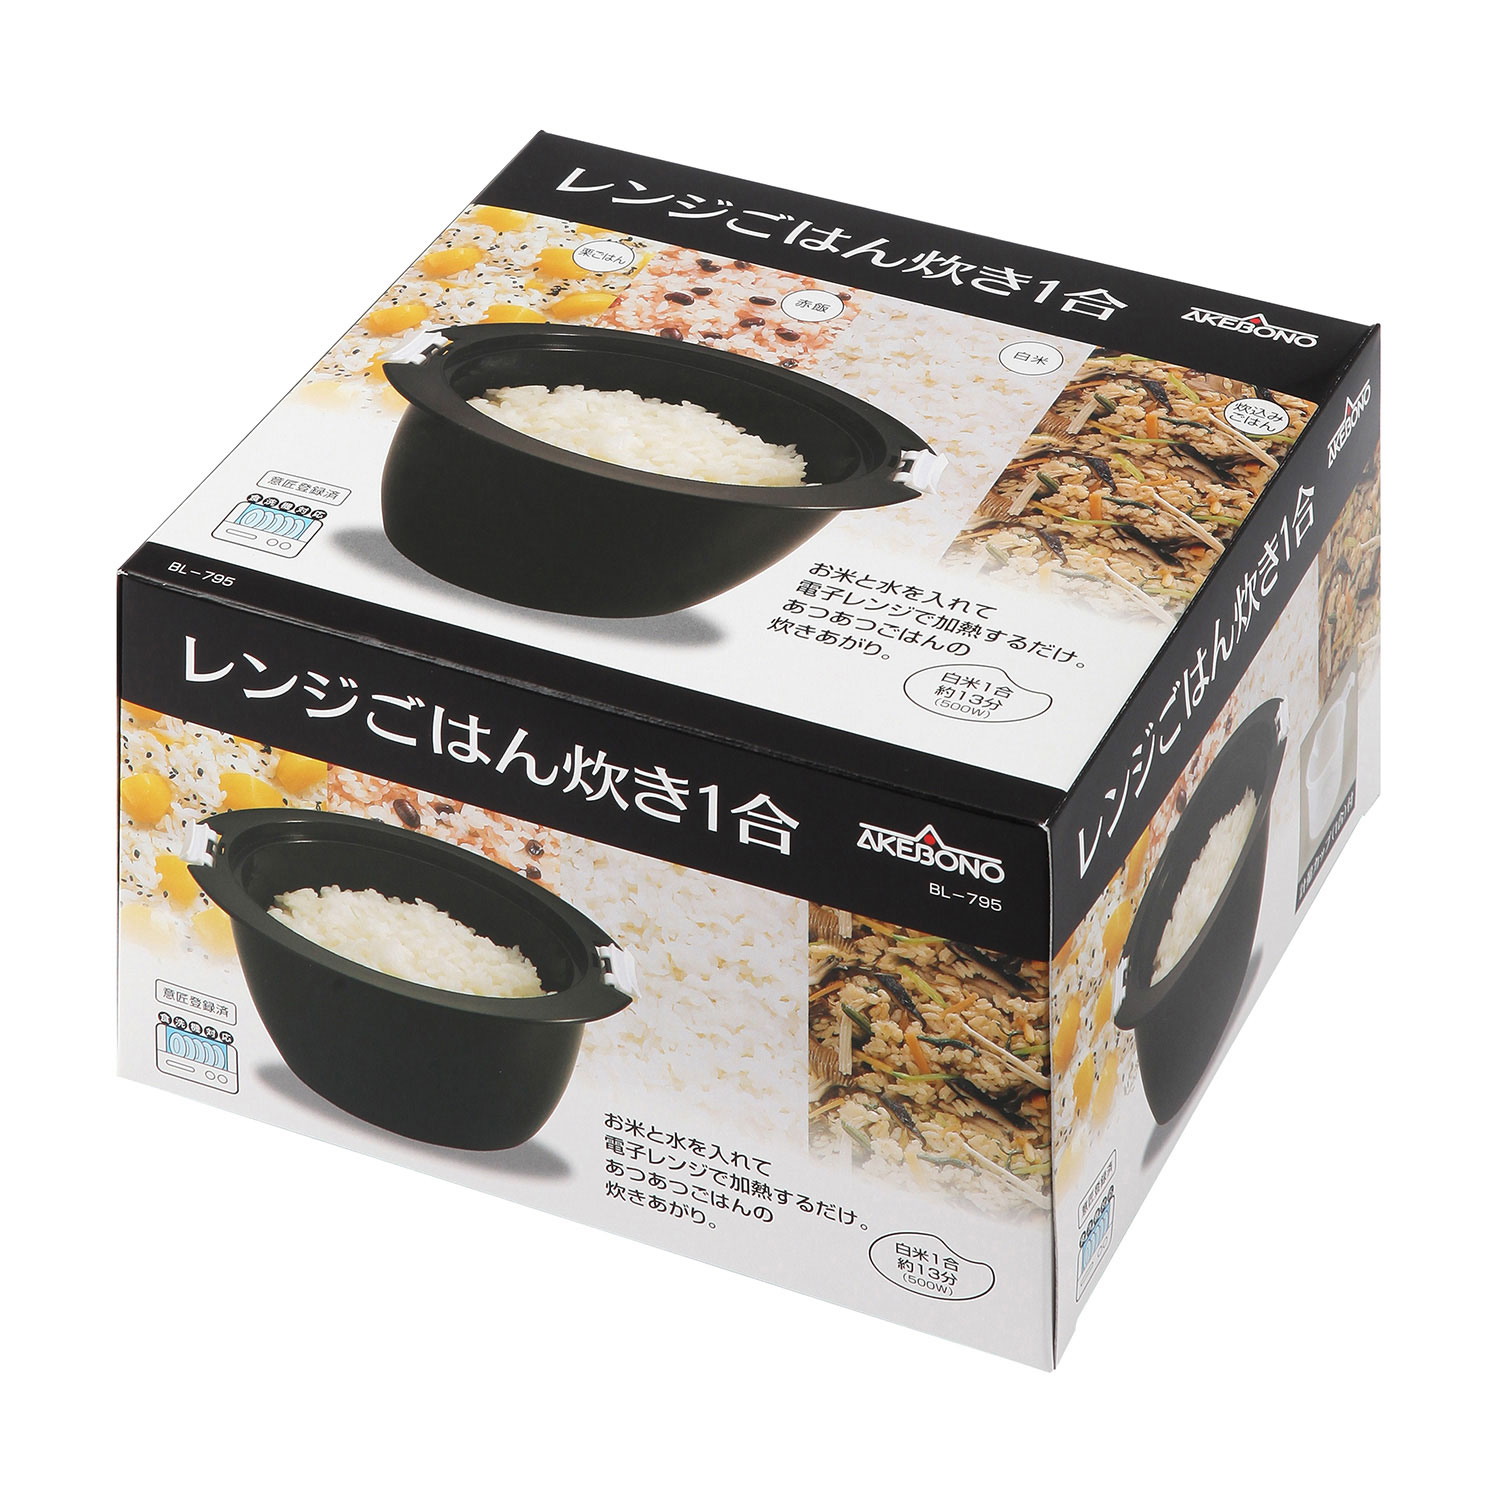 Microwave Rice Cooker 180ml /Akebono Industry Co., Ltd.